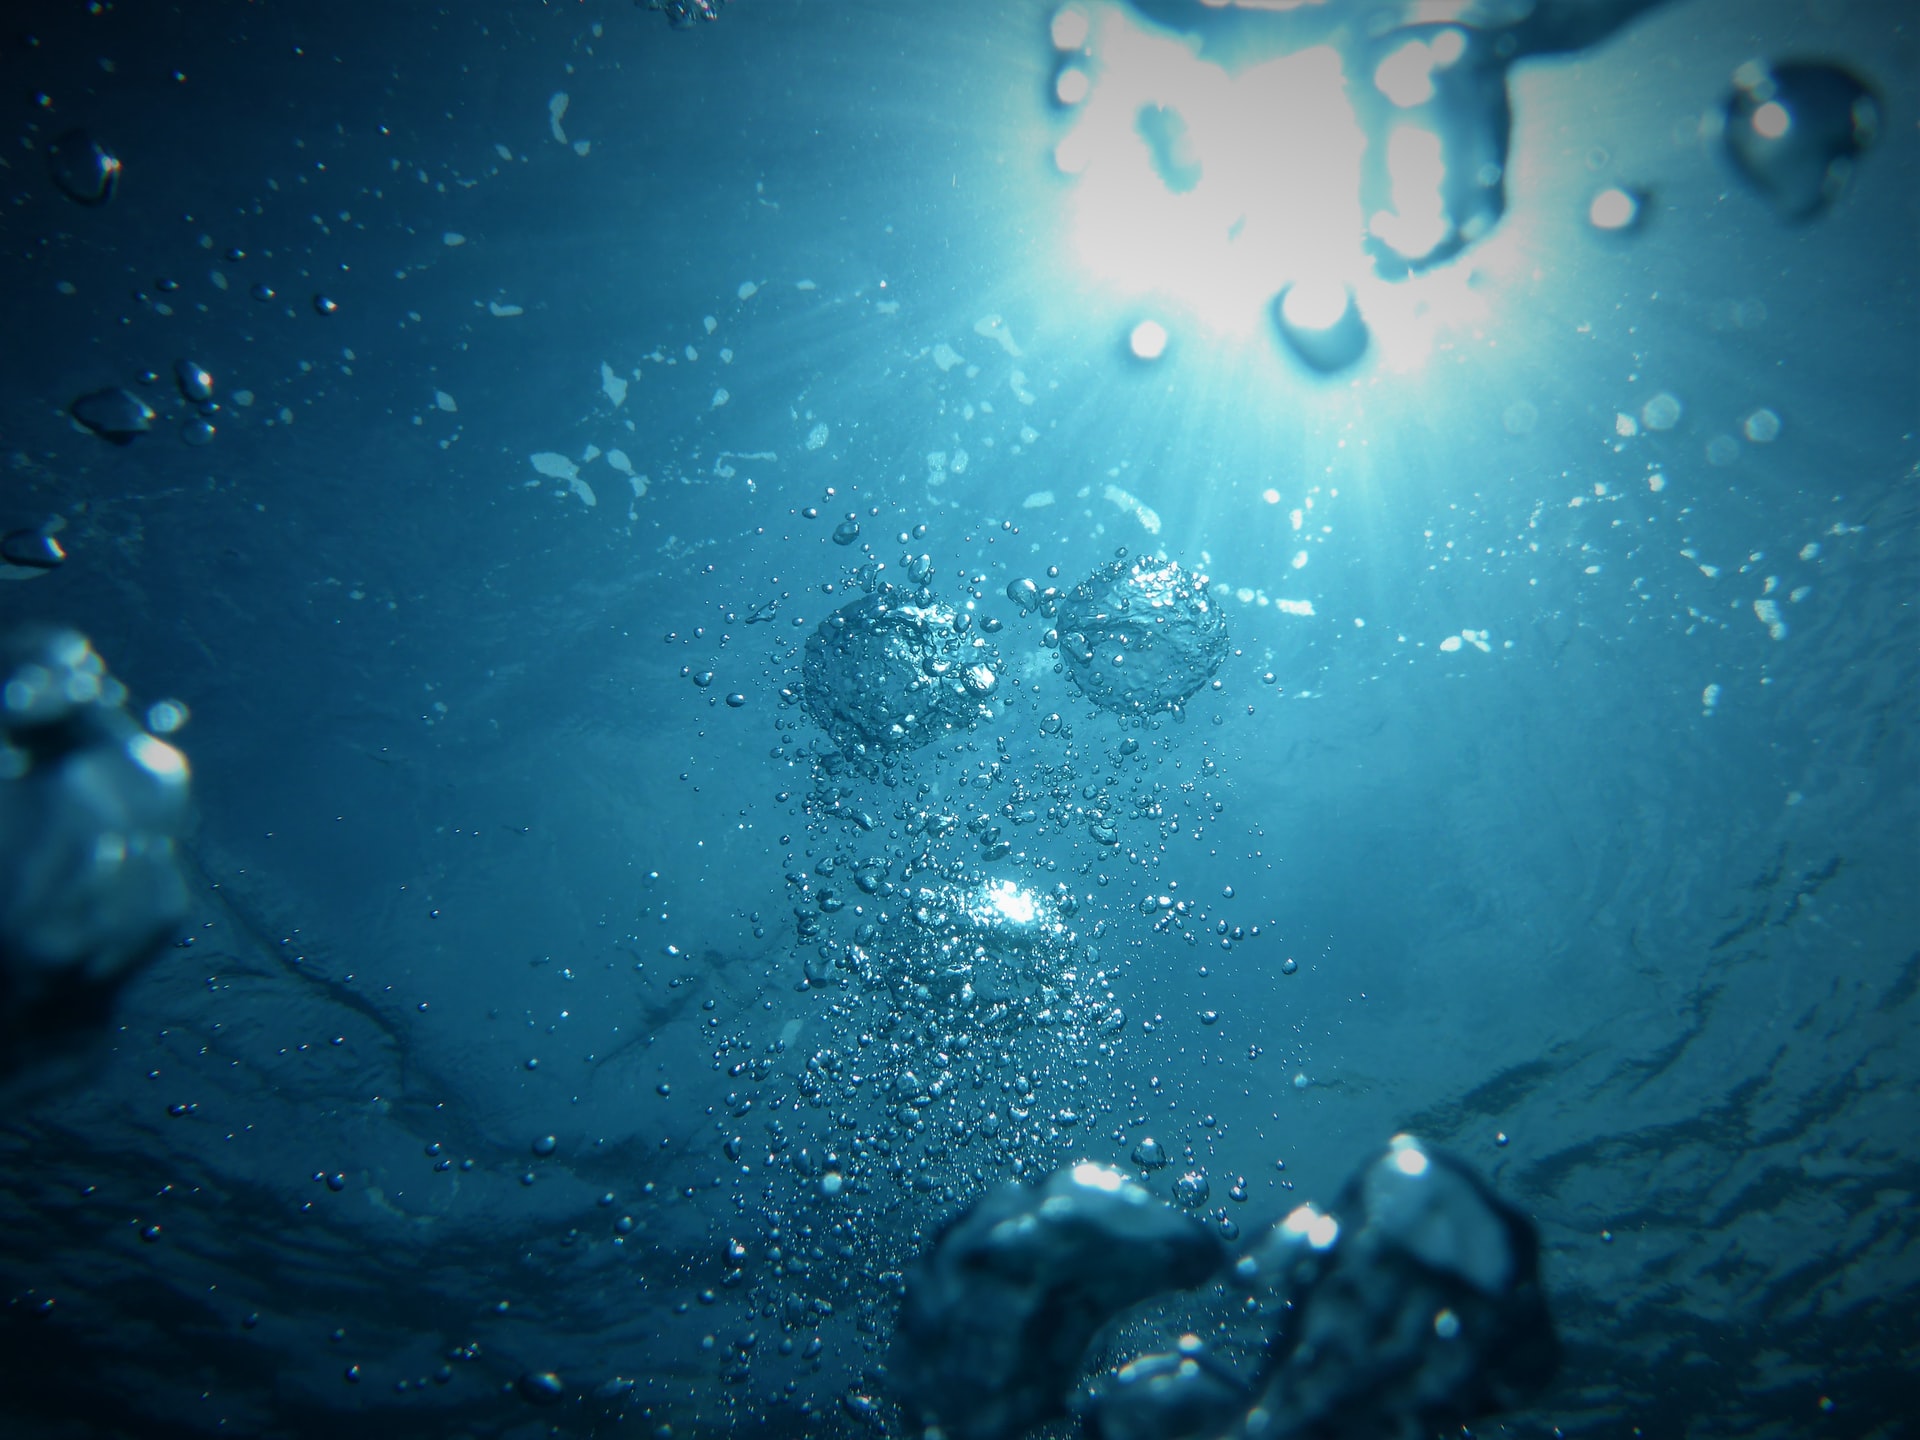 Film: The importance of the water for our climate